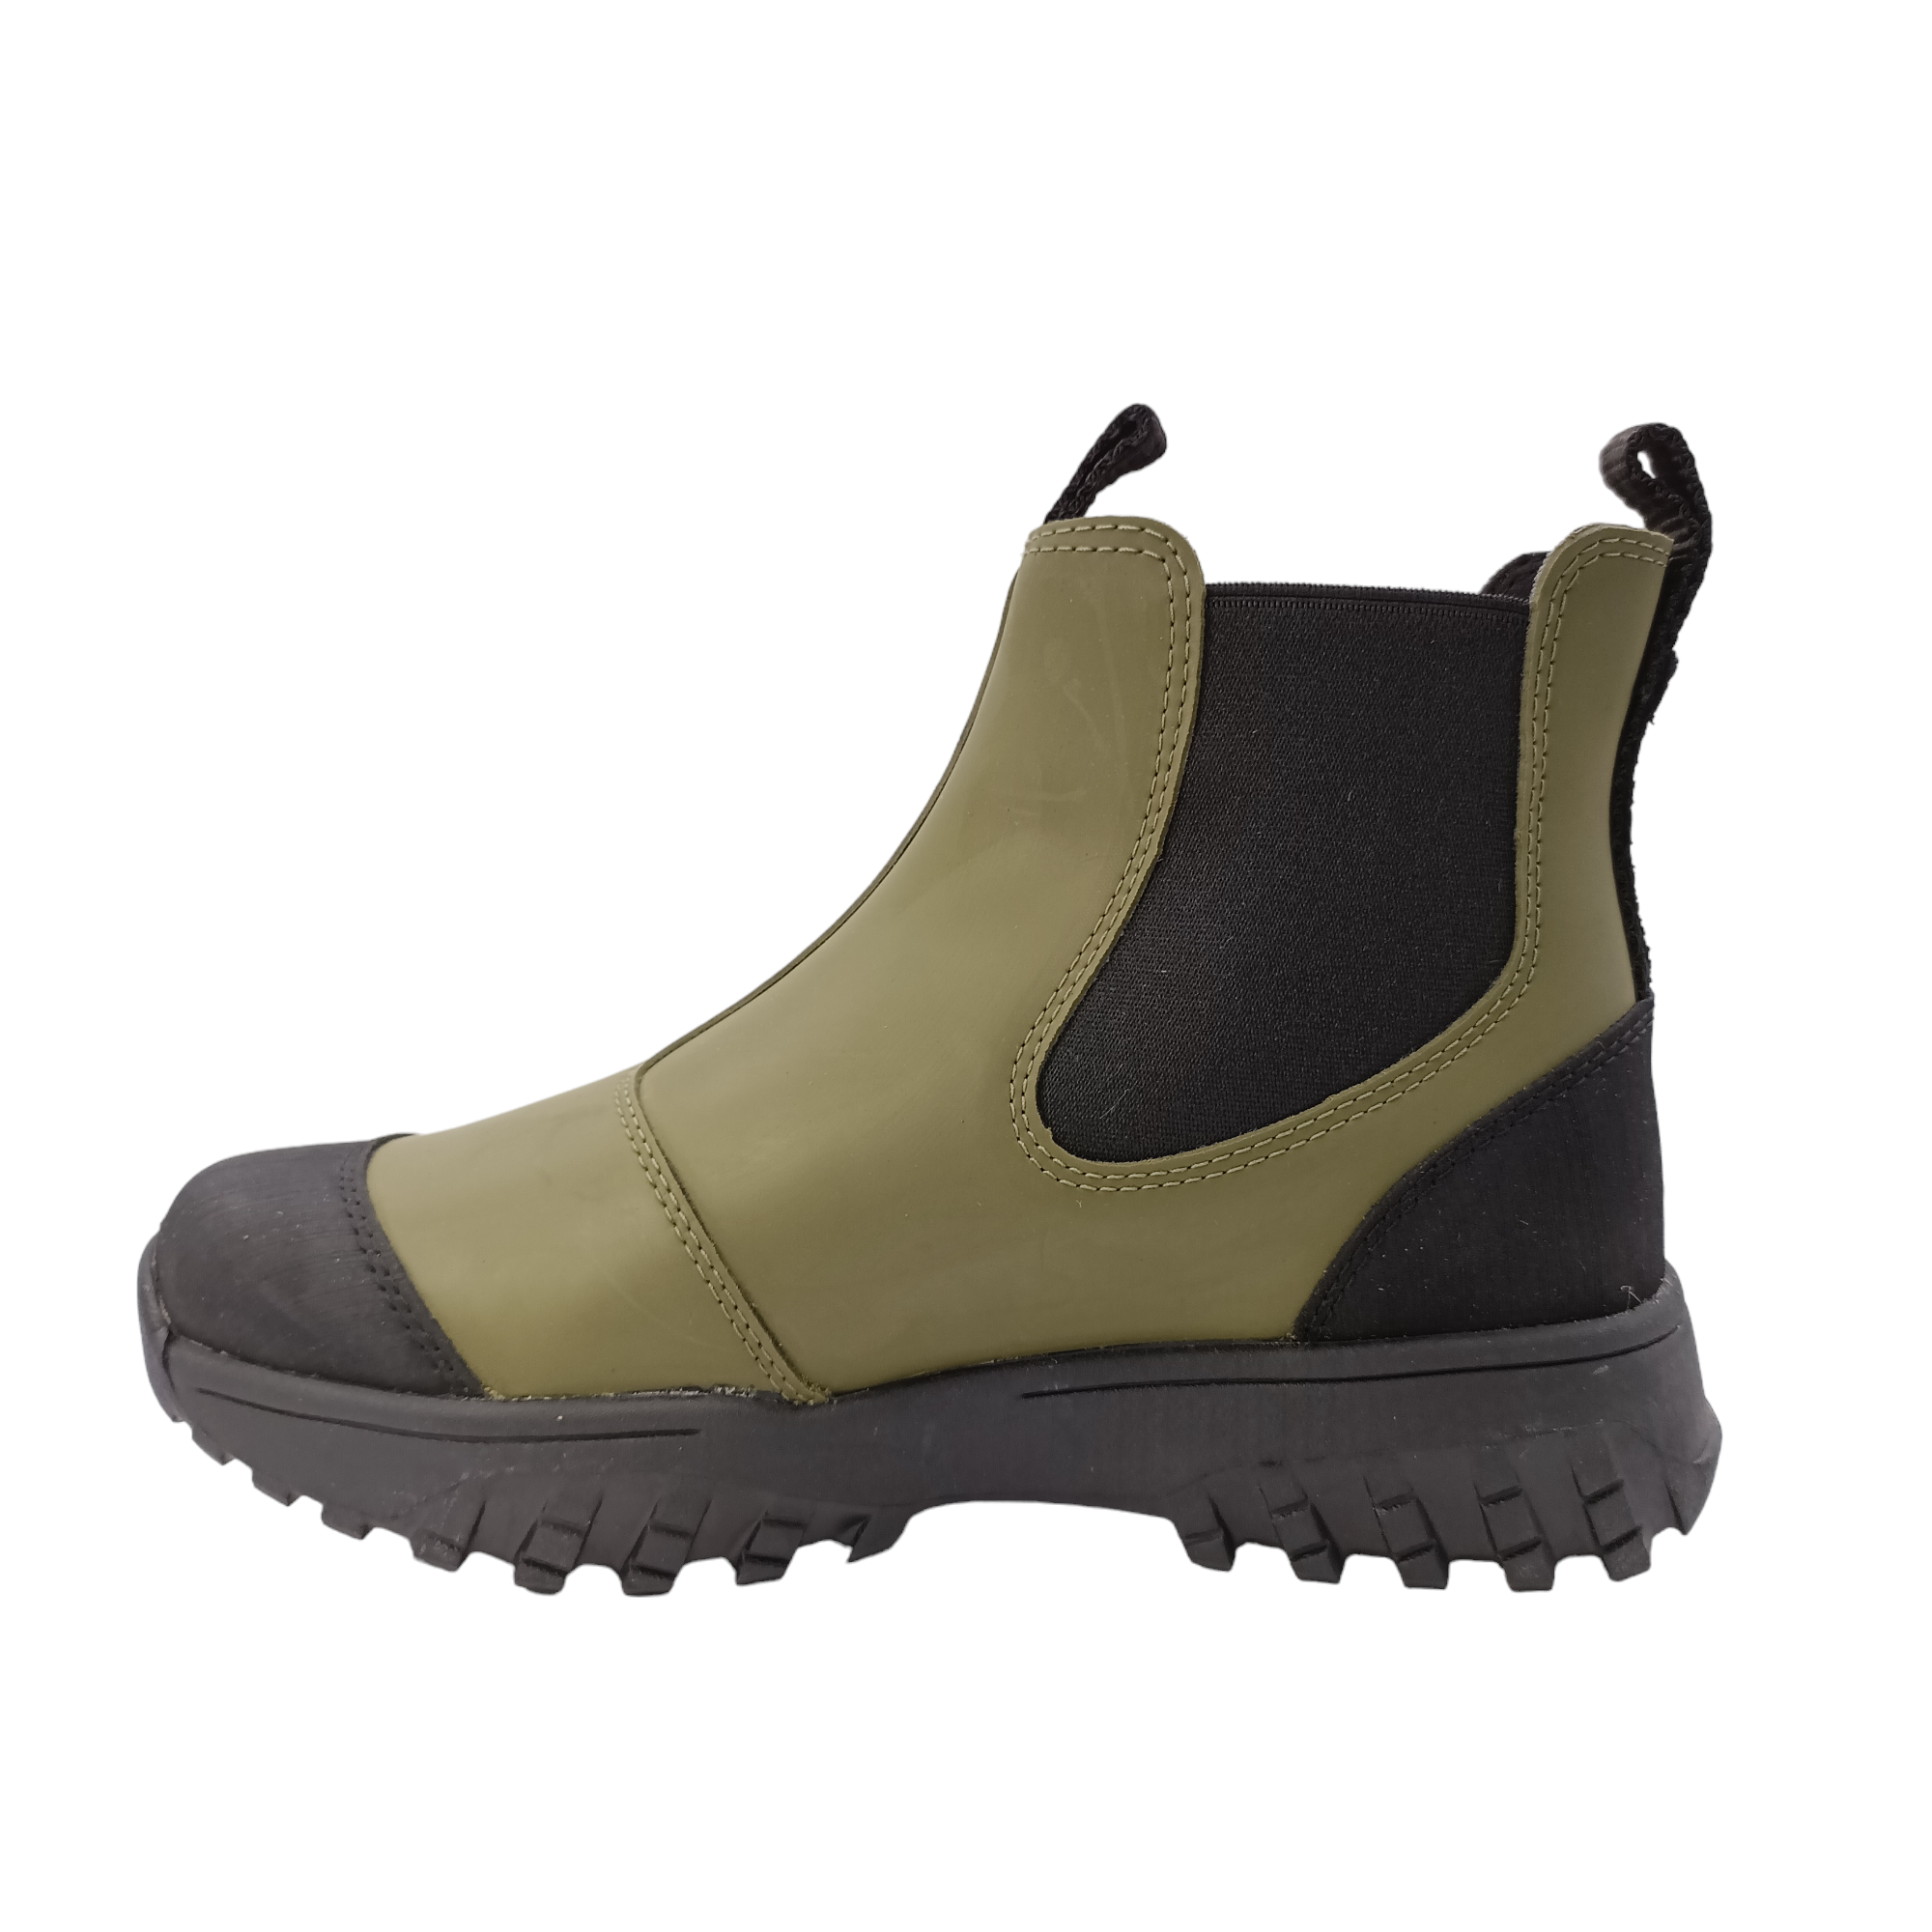 Shop Magda Waterproof Woden - with shoe&amp;me - from Woden - Boots - boots, Winter, Womens - [collection]